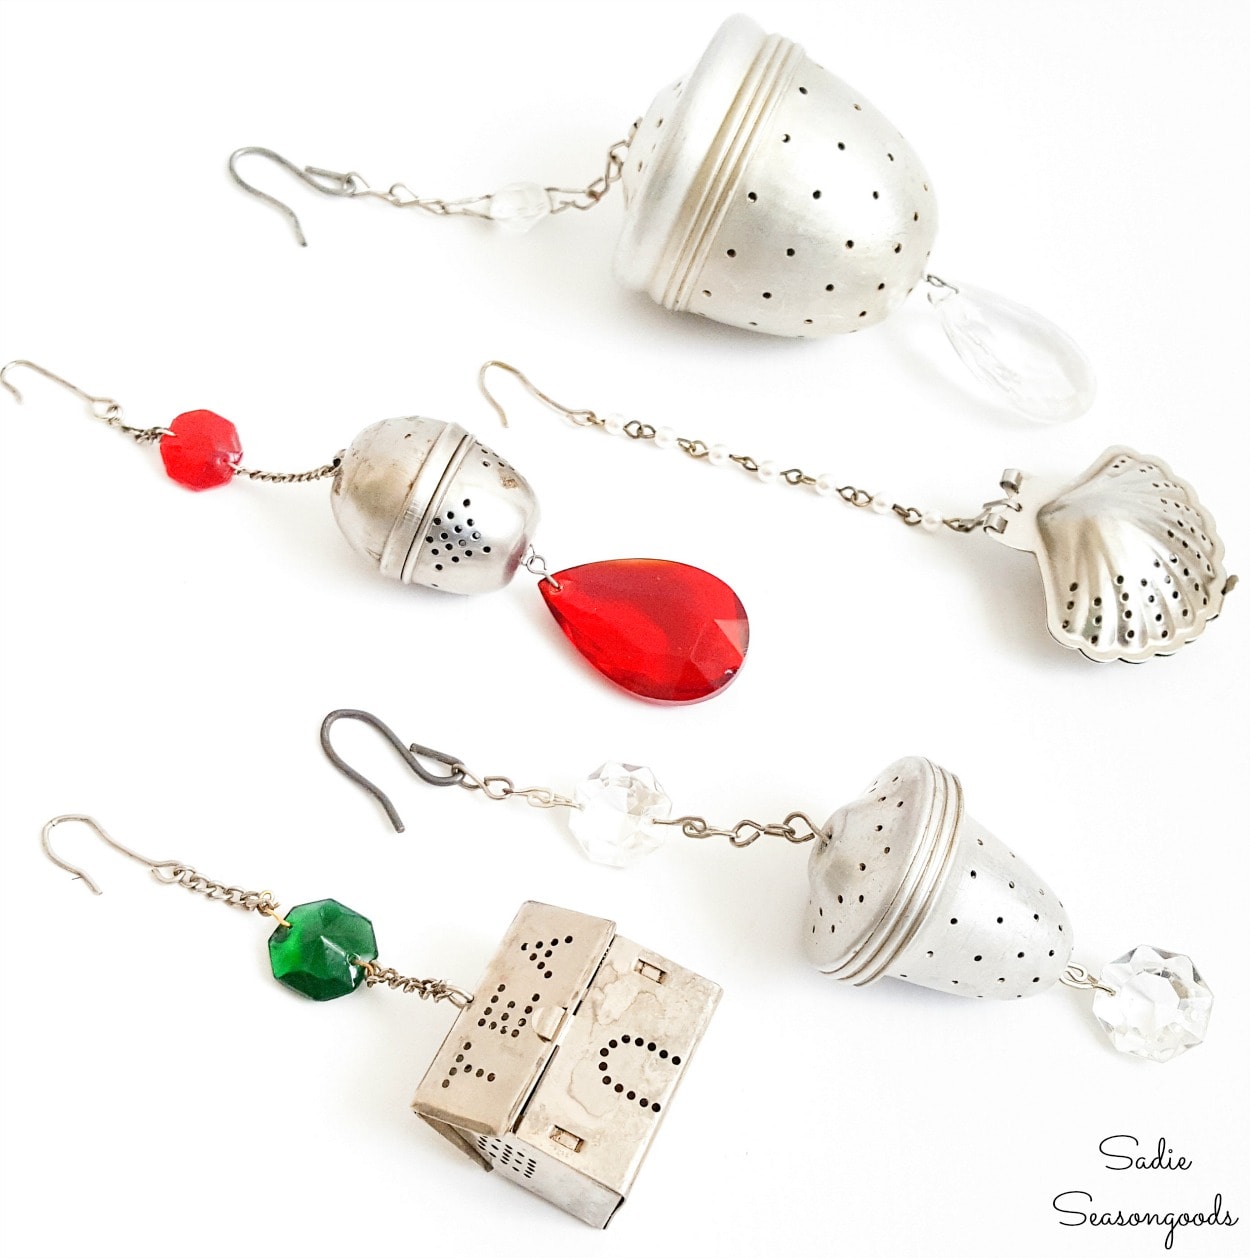 Ornament making with loose leaf tea strainers